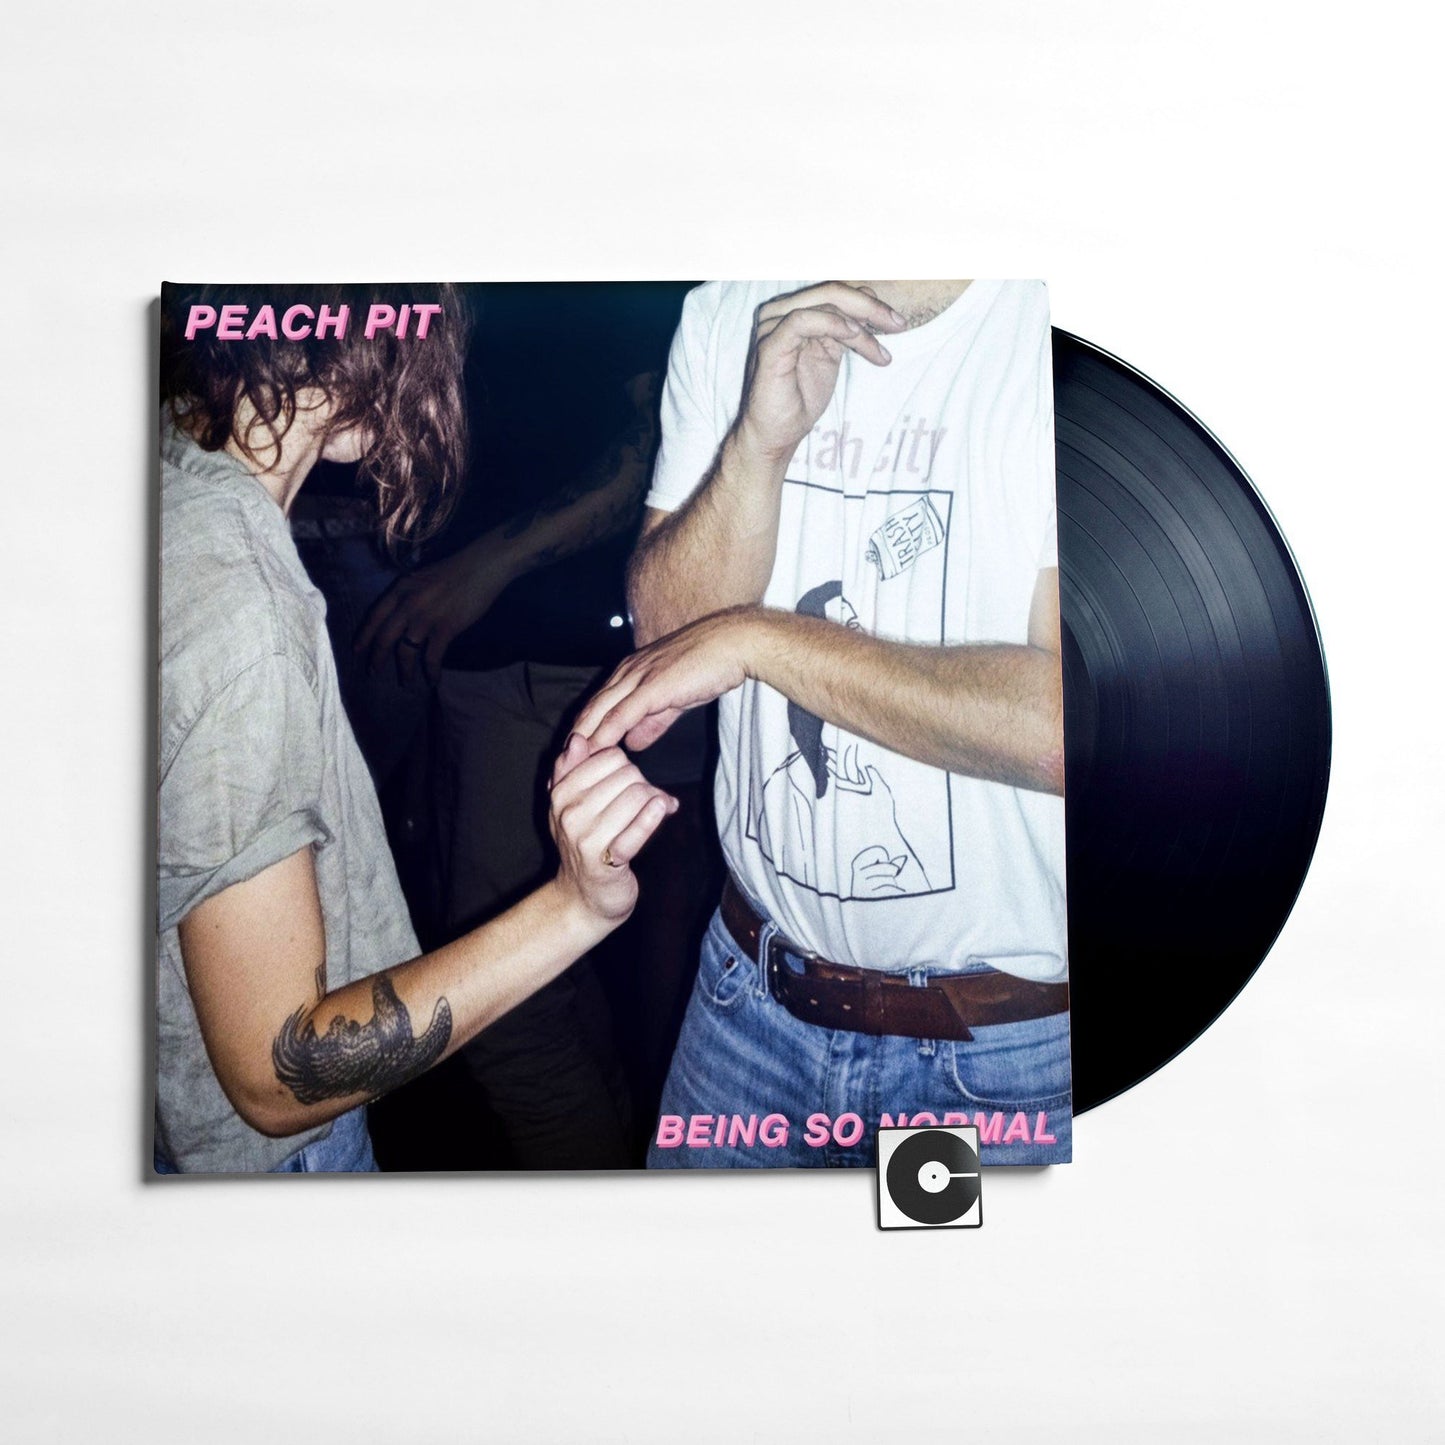 Peach Pit - "Being So Normal"